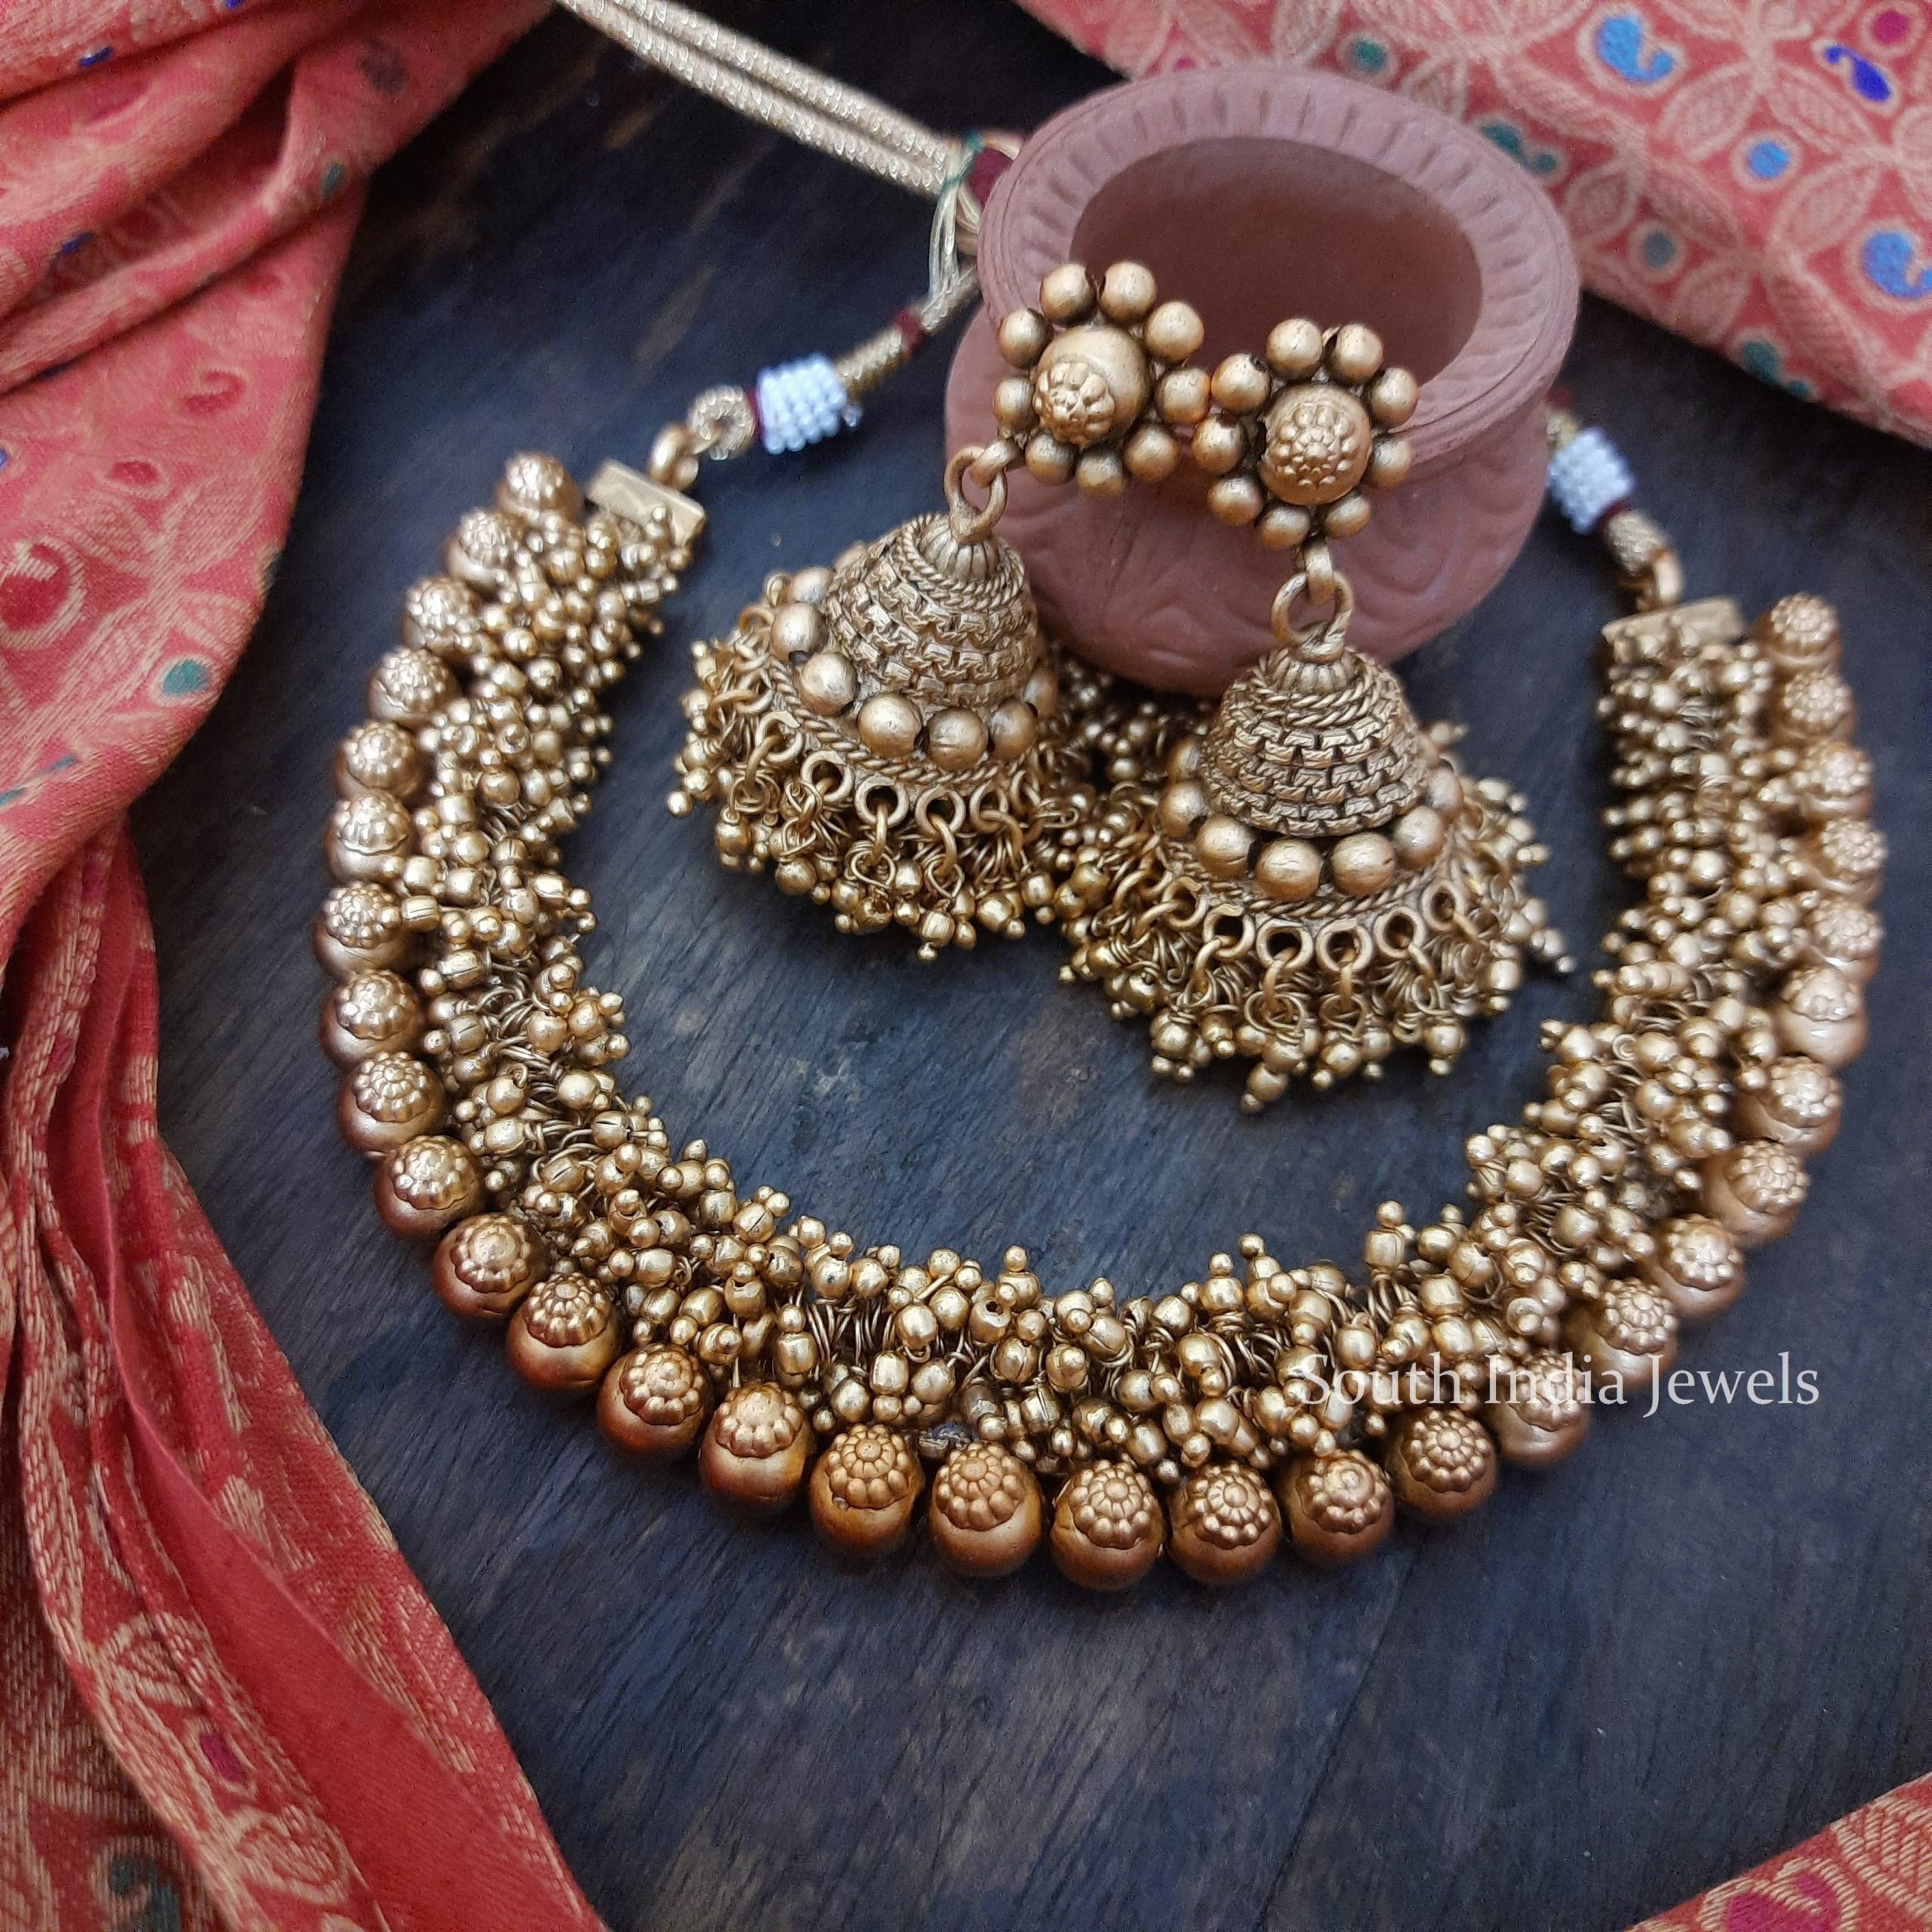 Gorgeous Golden Beads Necklace